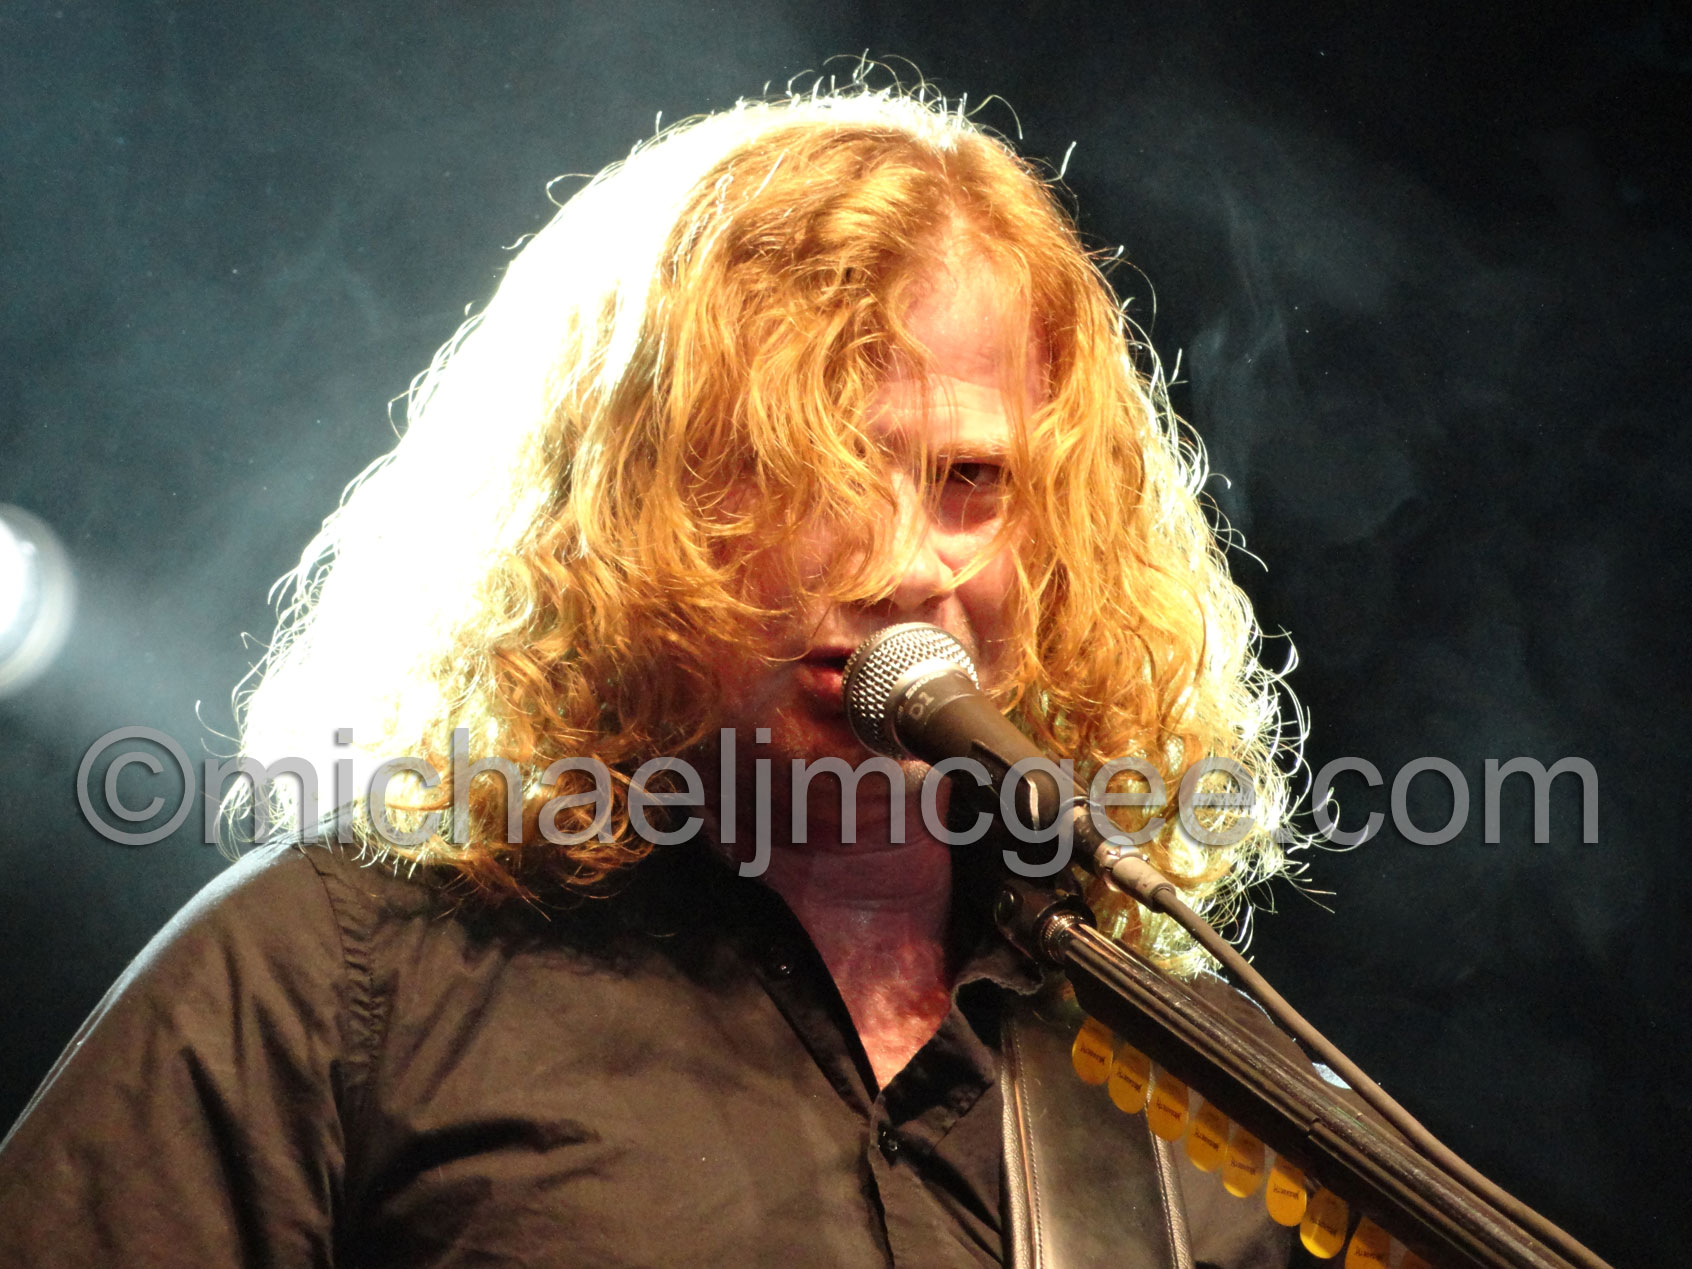 Dave Mustaine / michaeljmcgee.com